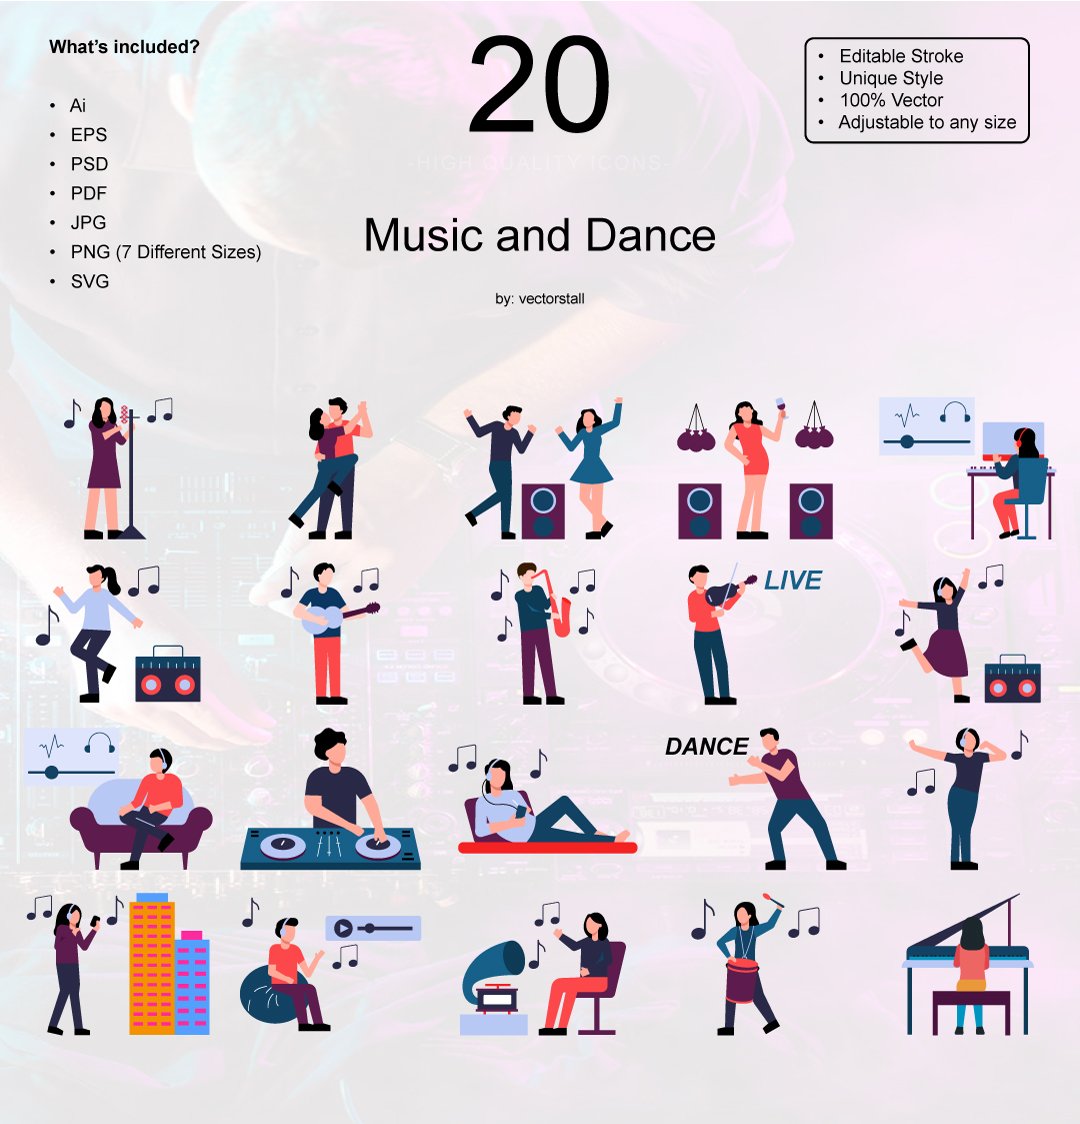 Music and Dance cover image.